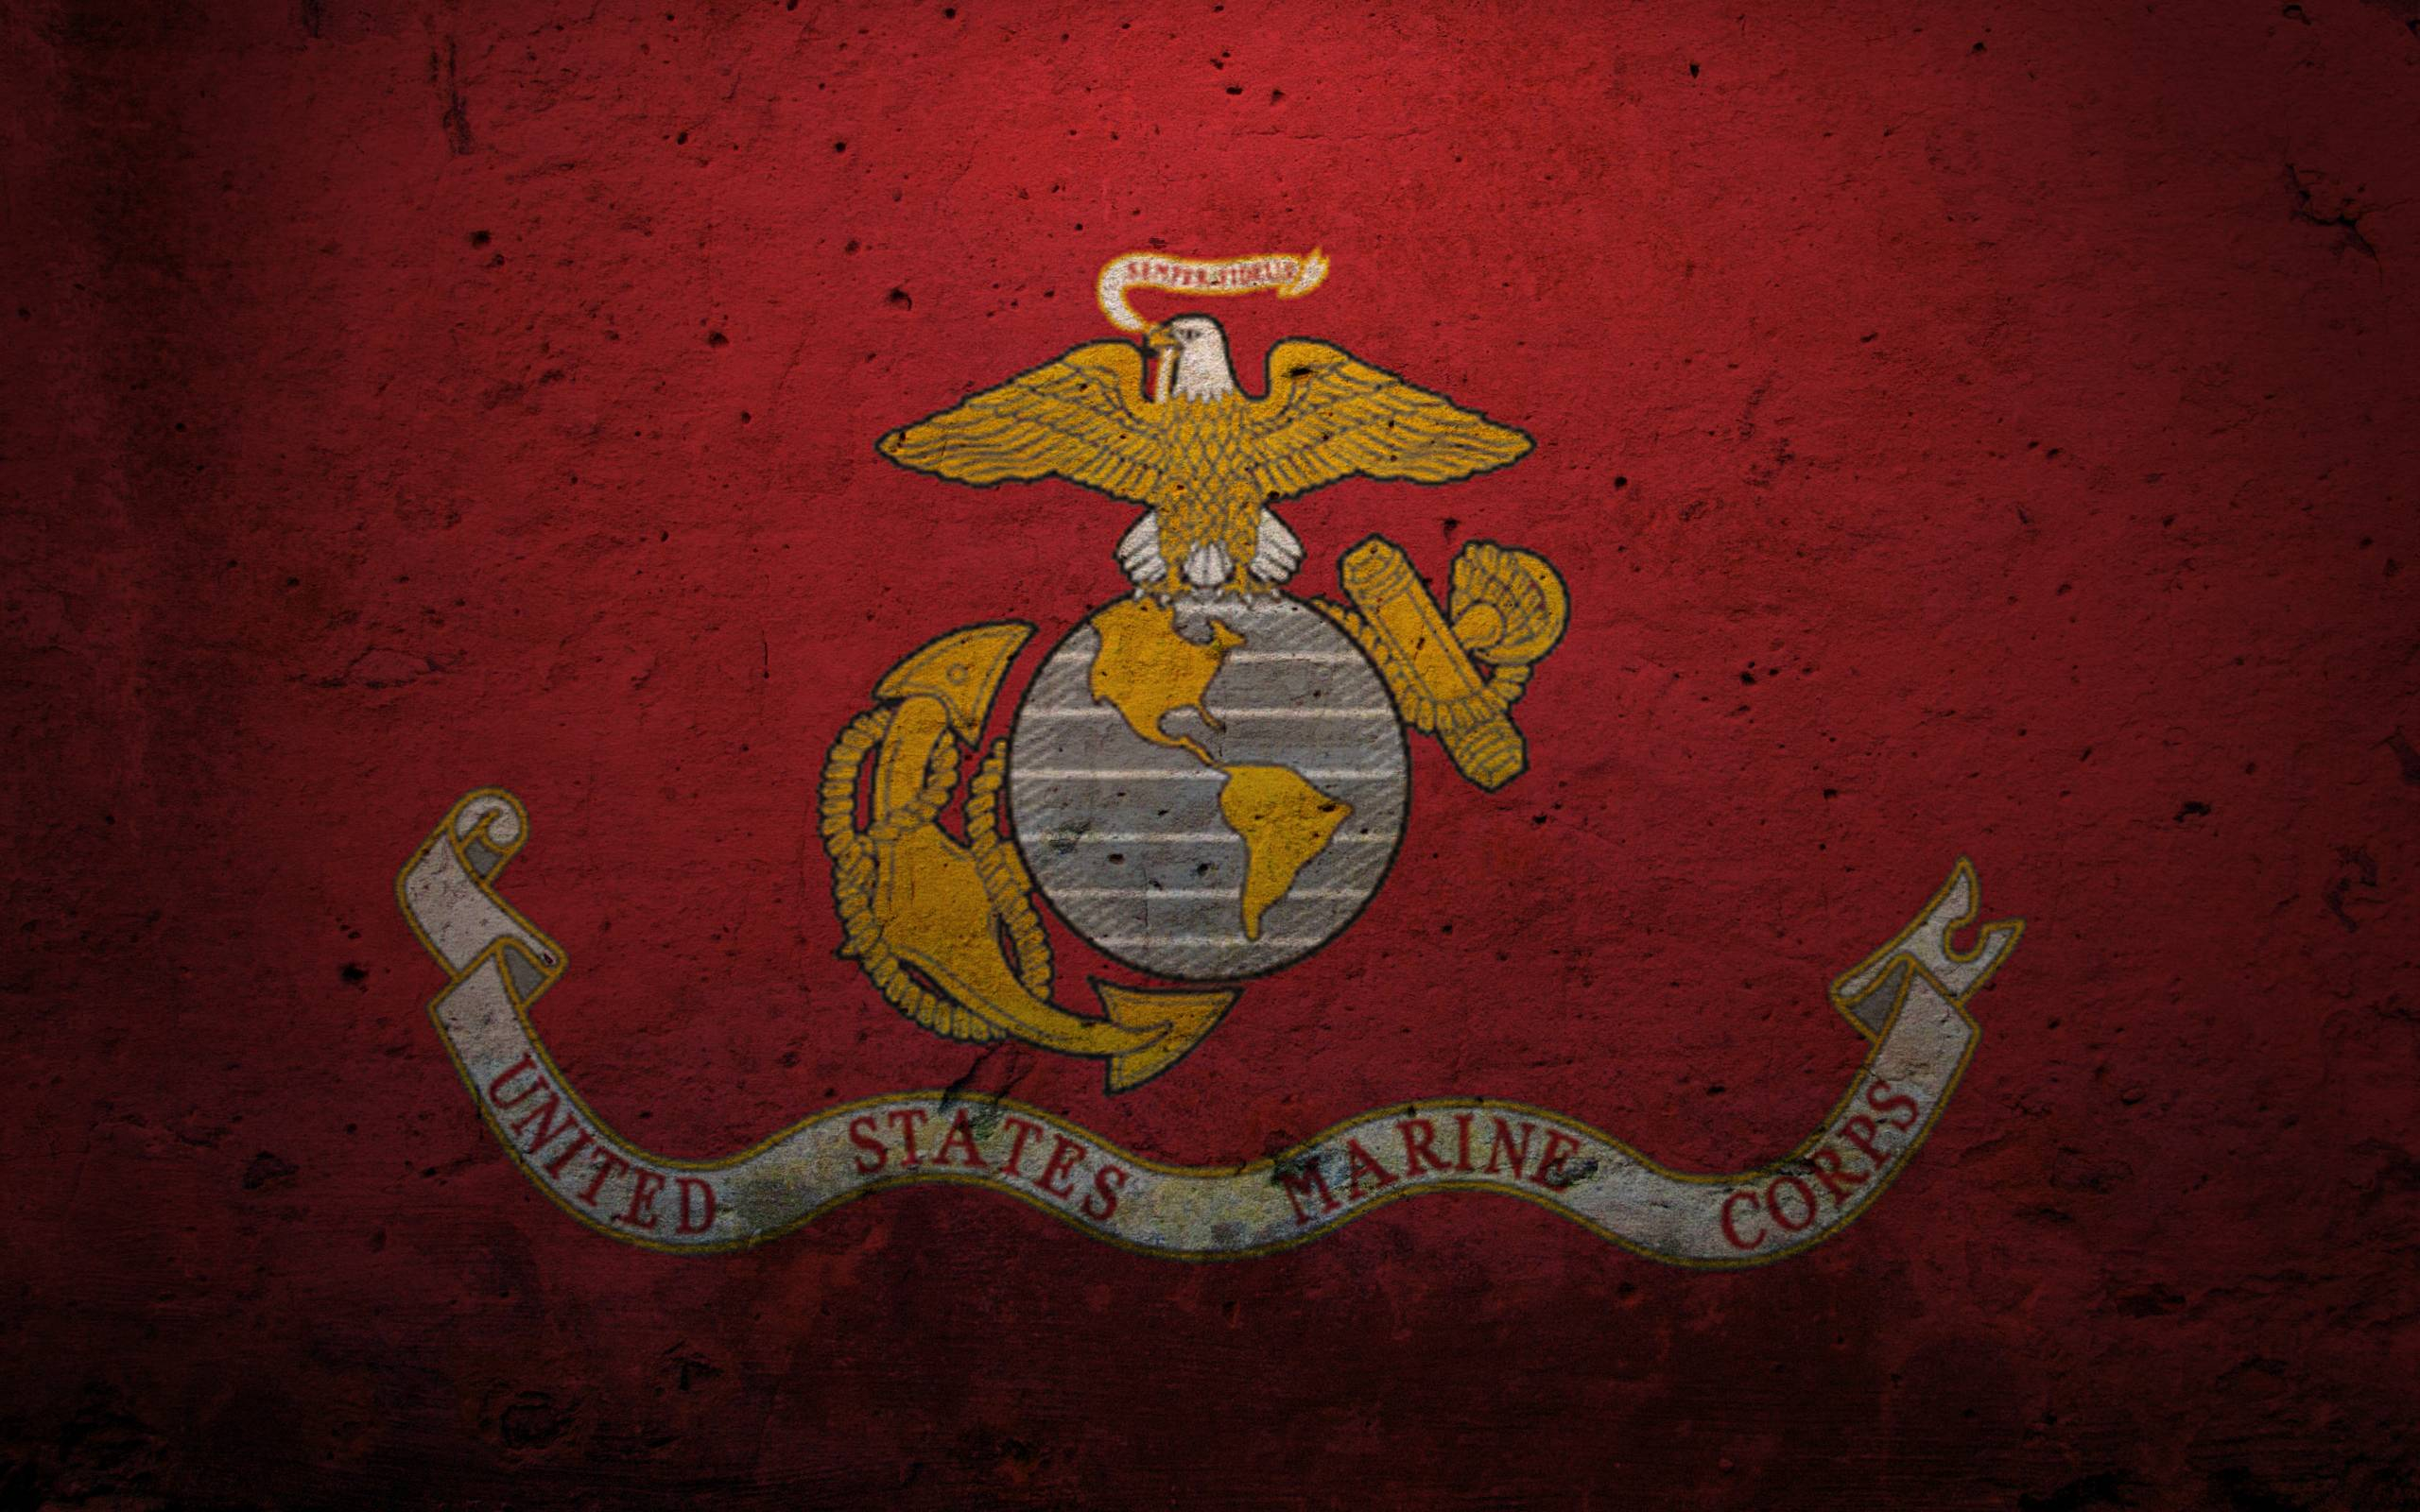 2560x1600 United States Marine Corps Wallpapers